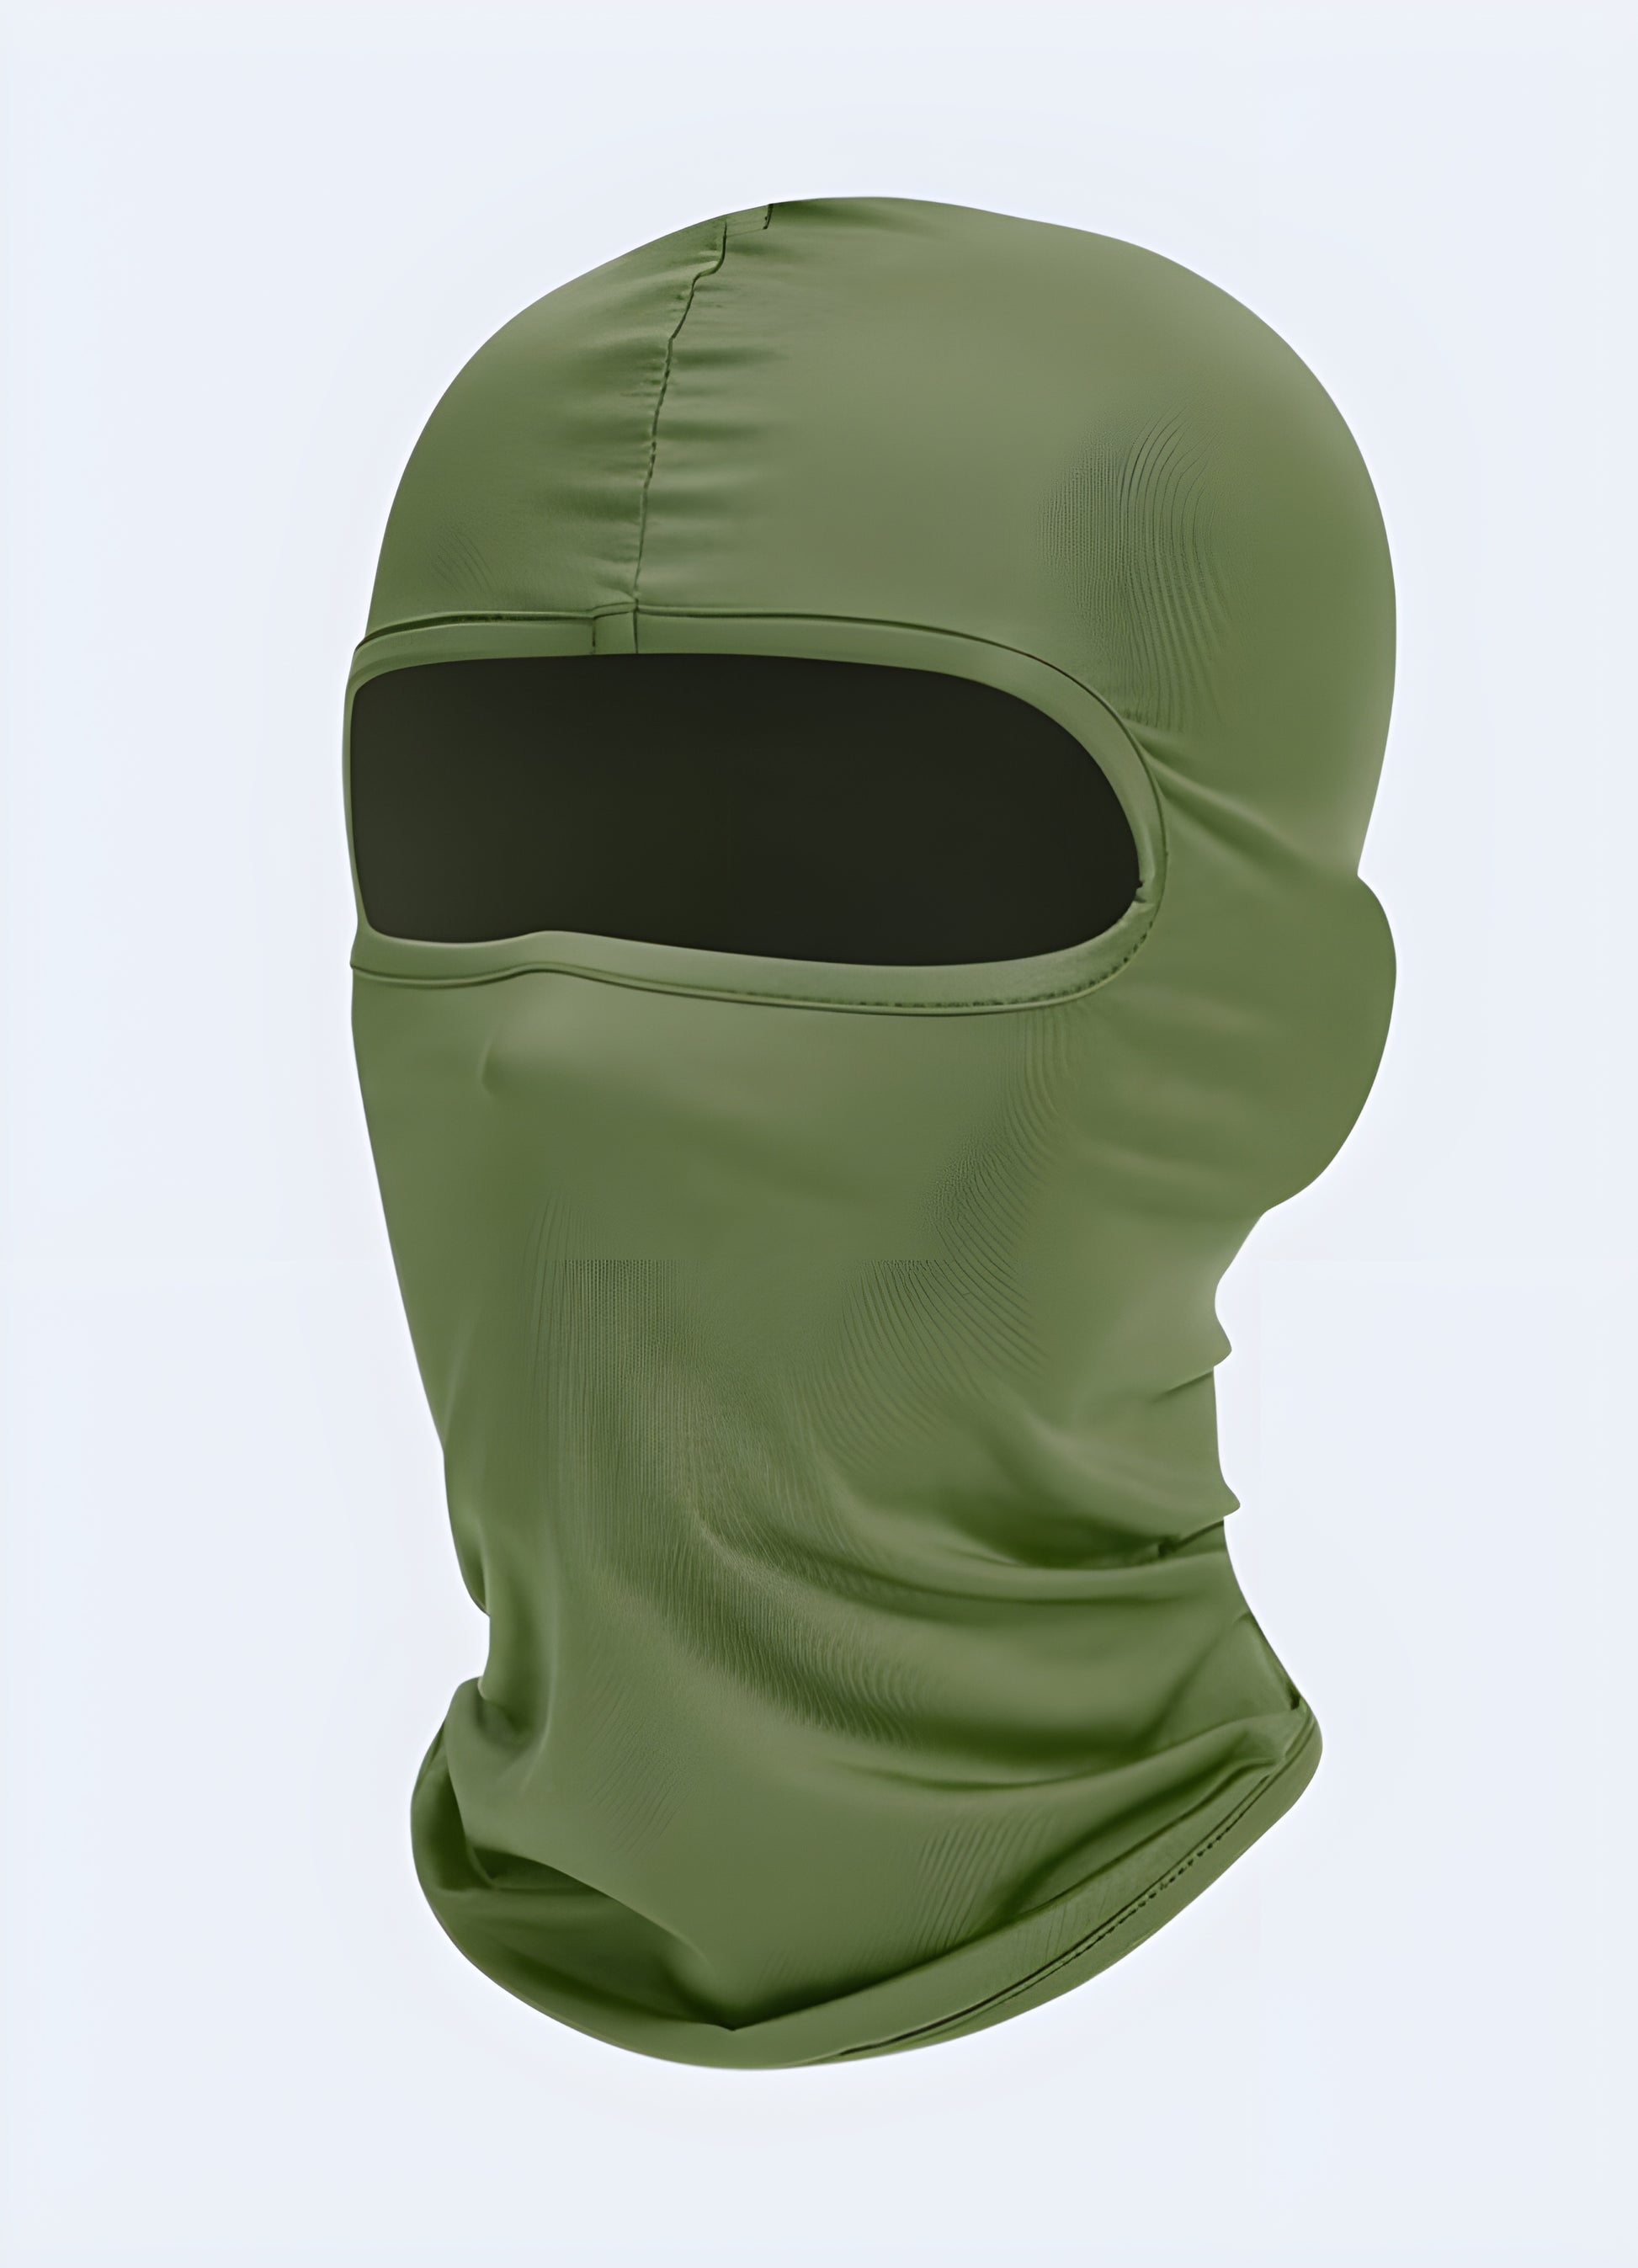 Embrace the spirit of stealth & agility. This balaclava equips you for any challenge, big or small.